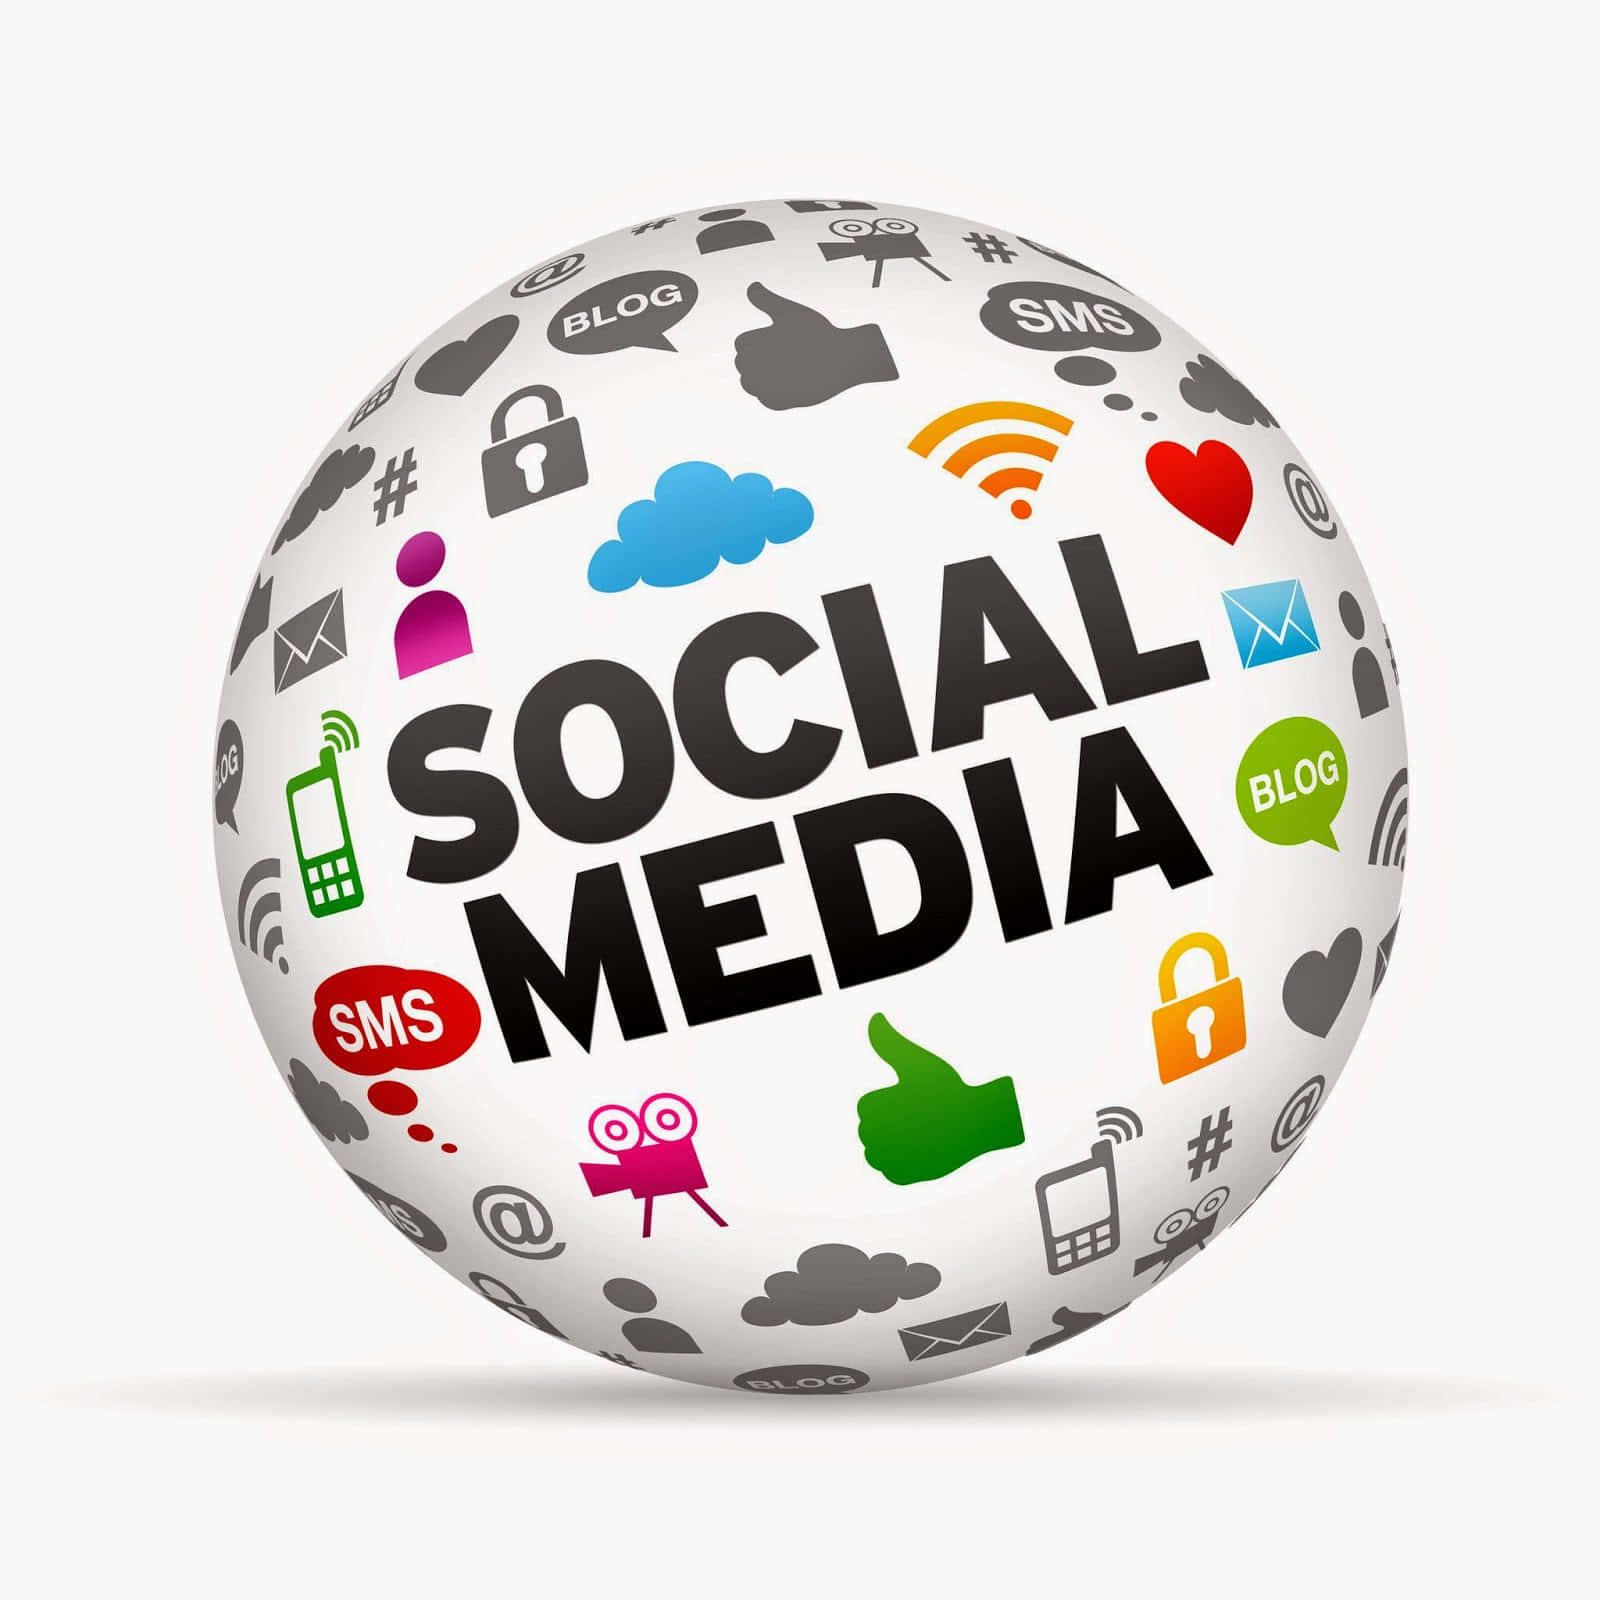 A cluster of floating social media icons exemplifying the digital age and online connectivity.